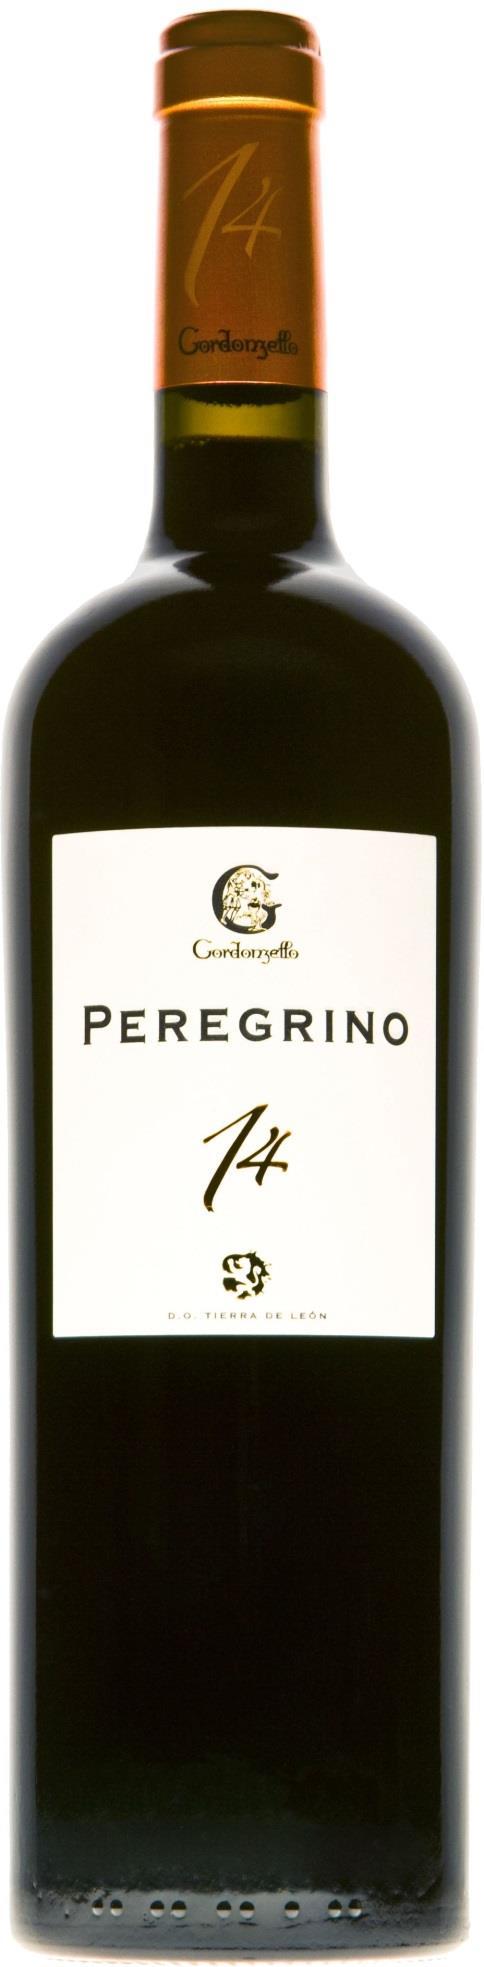 PEREGRINO 14 Variety: 100 % Prieto Picudo from our vineyards. Winemaking process: Selective manual harvest. The juice makes the alcoholic fermentation in steel vat.